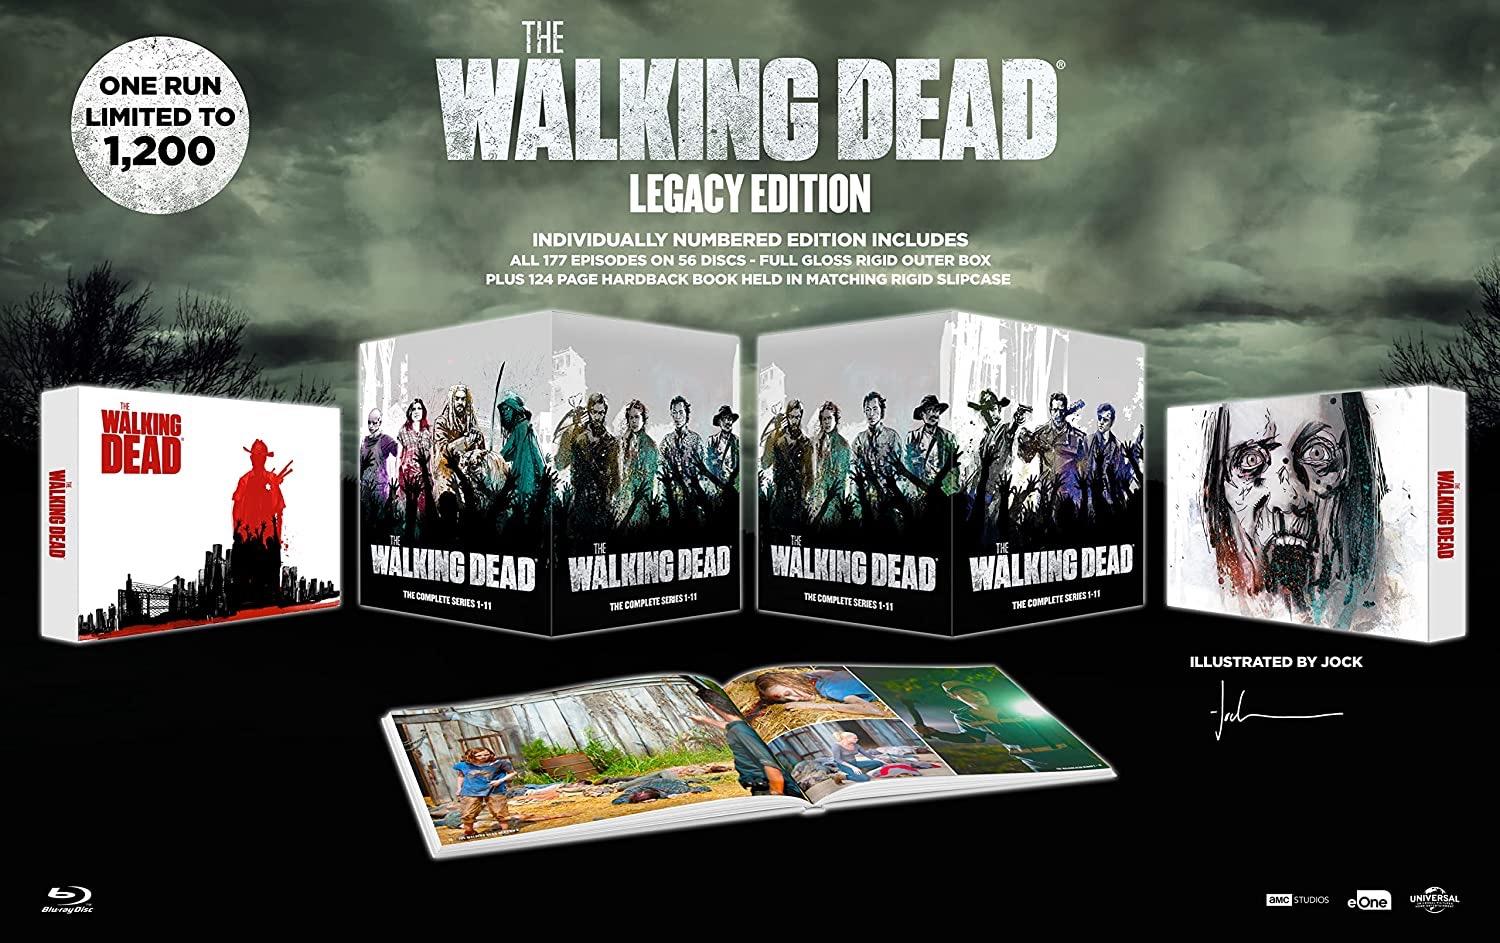 The Walking Dead: The Complete Series Coming to Blu-Ray